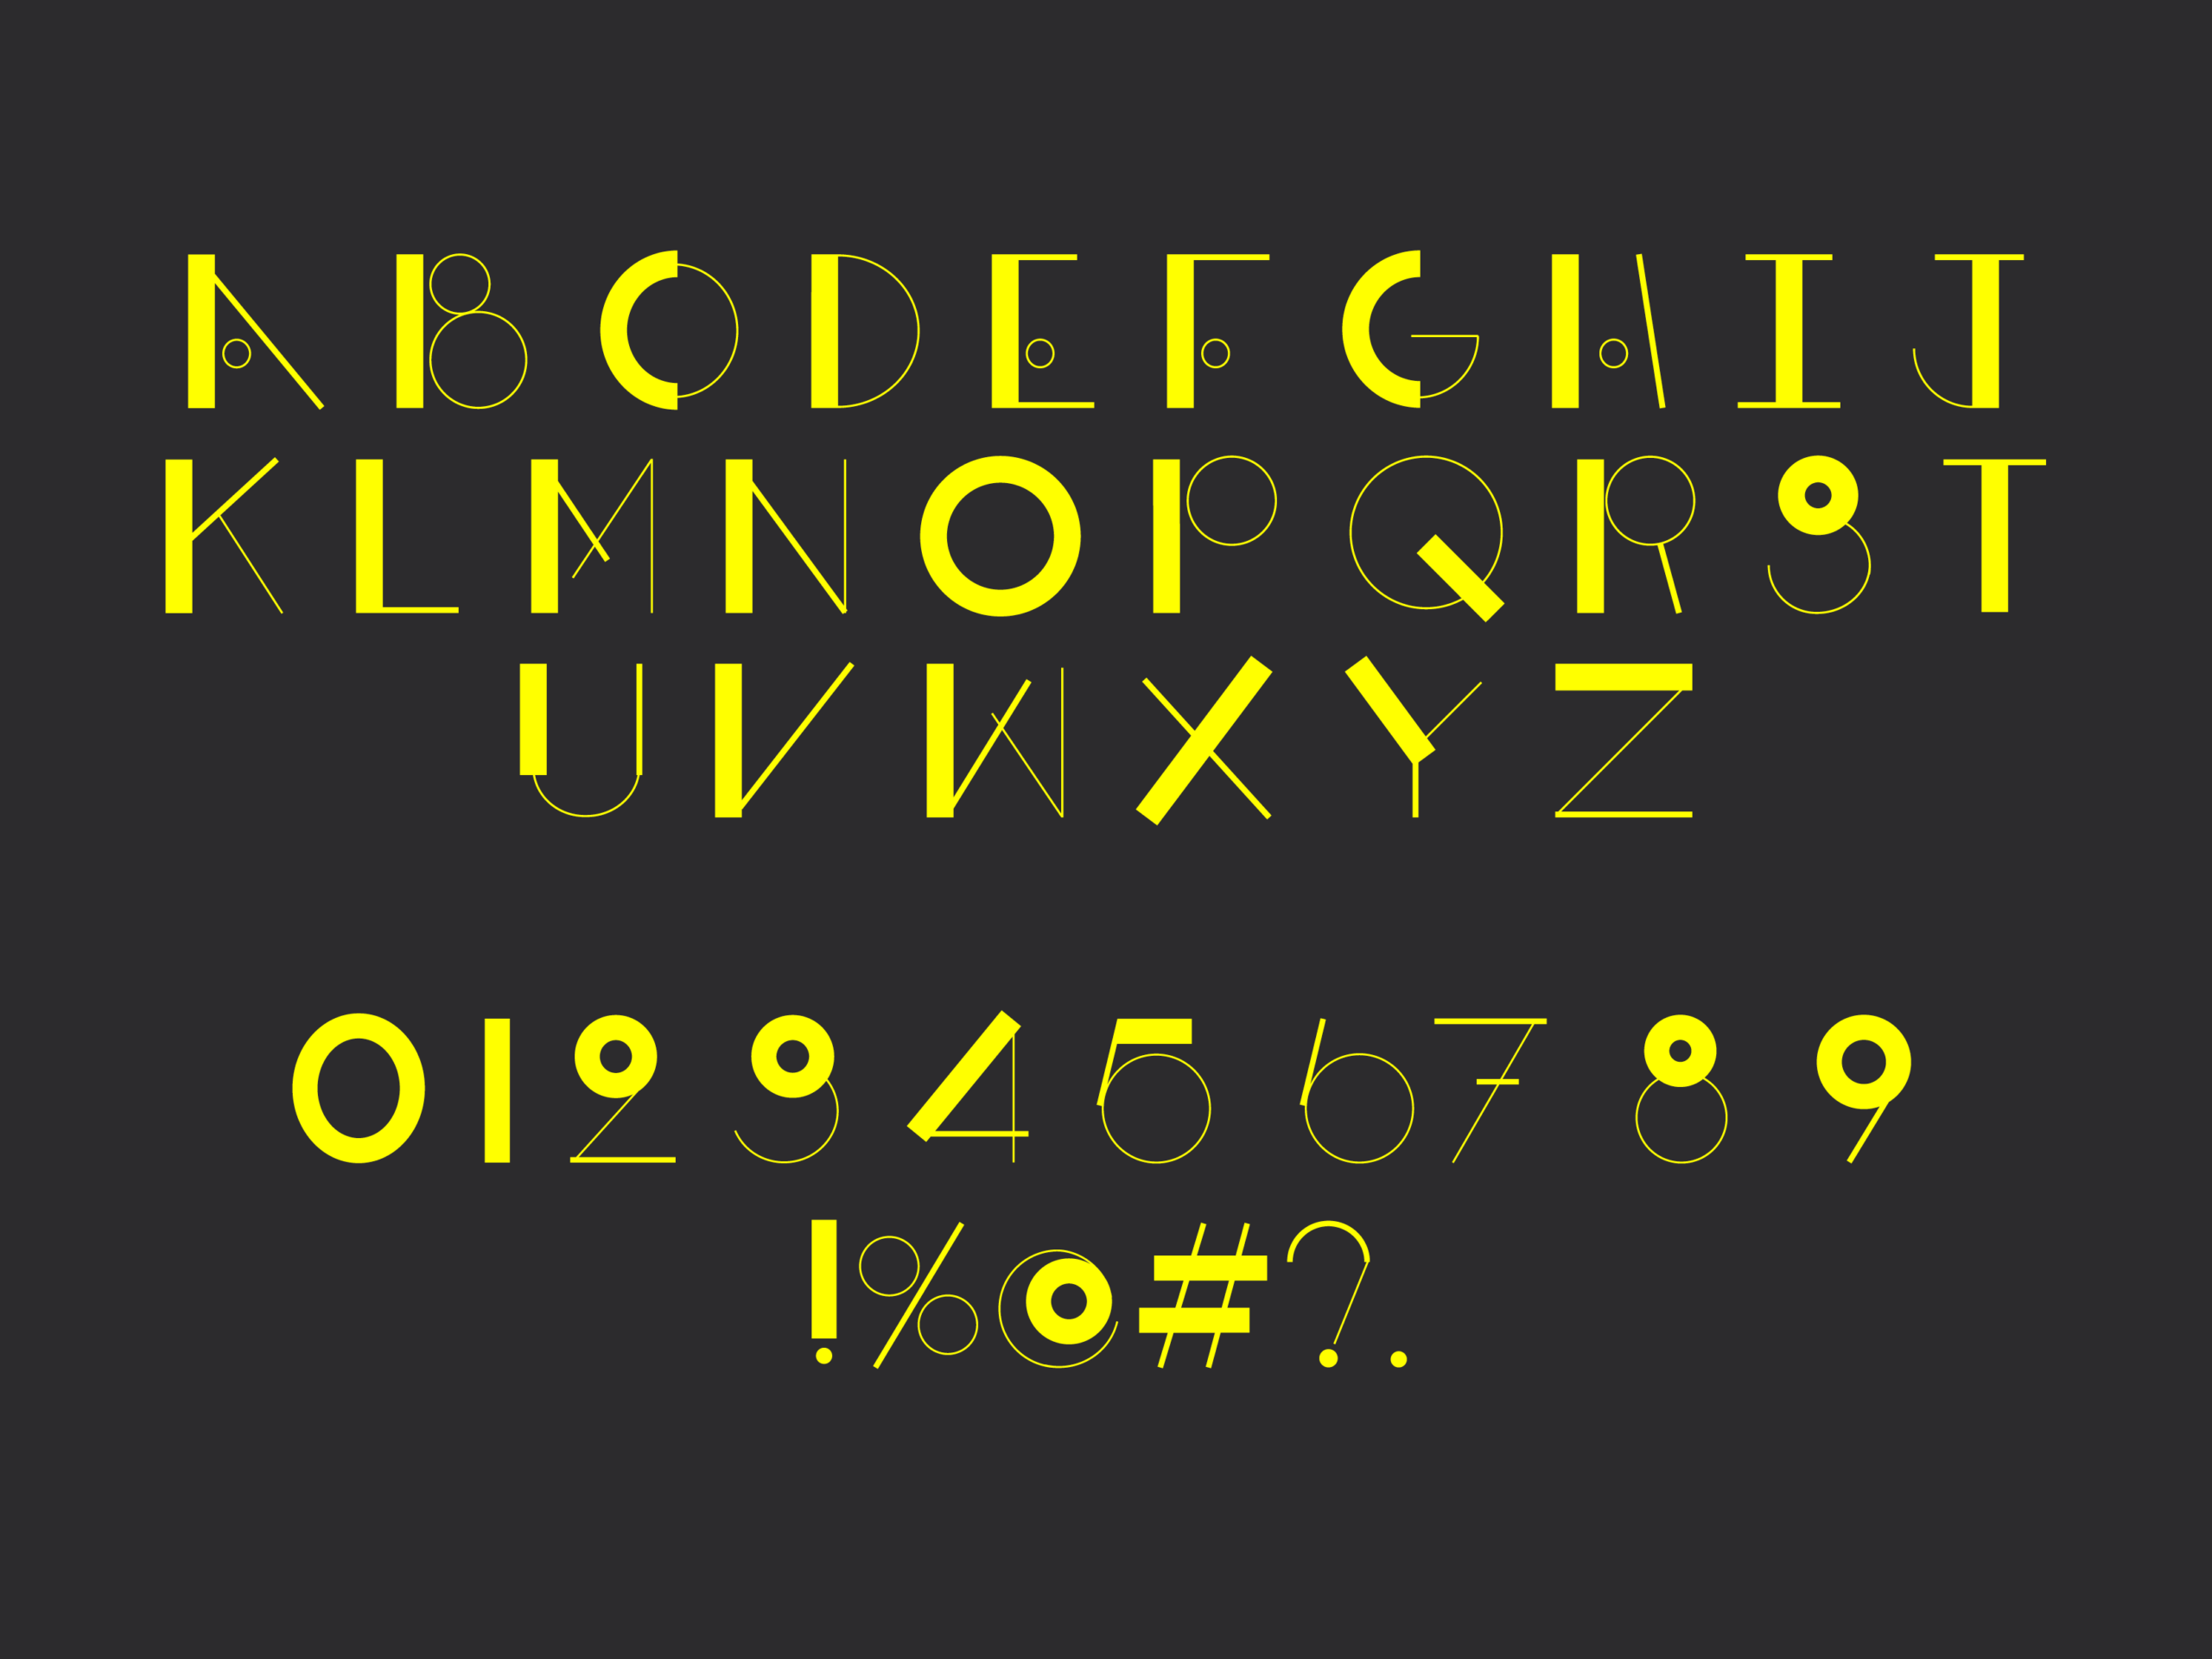 Alphabet and numbers written in unique typeface using bold and thin lines